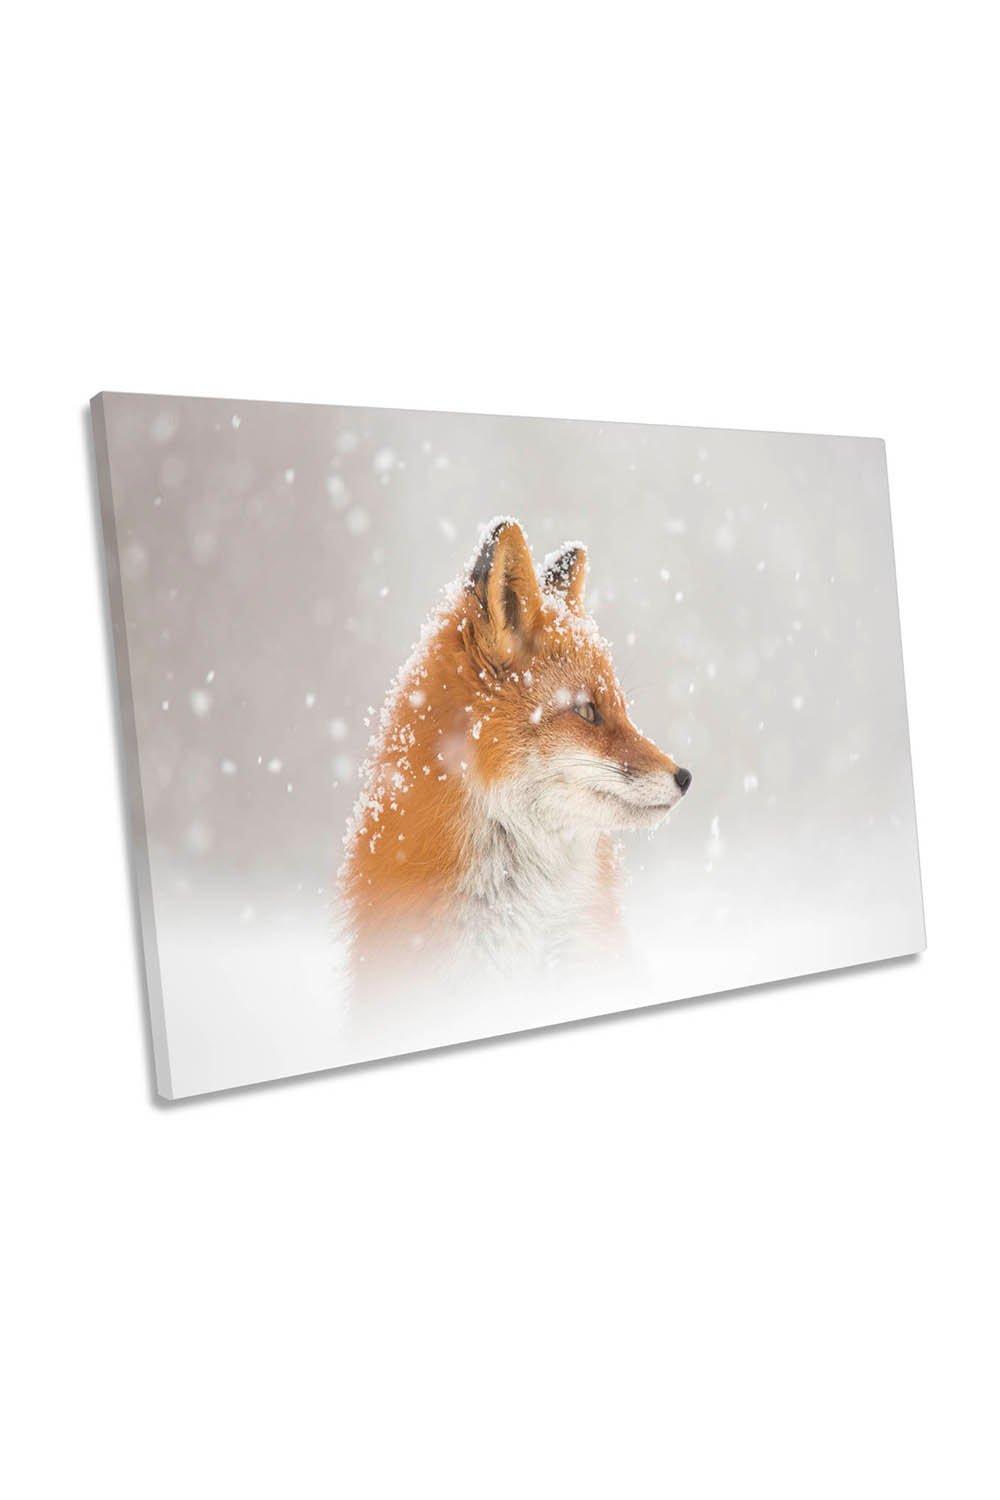 Snow is Falling Orange Fox Canvas Wall Art Picture Print